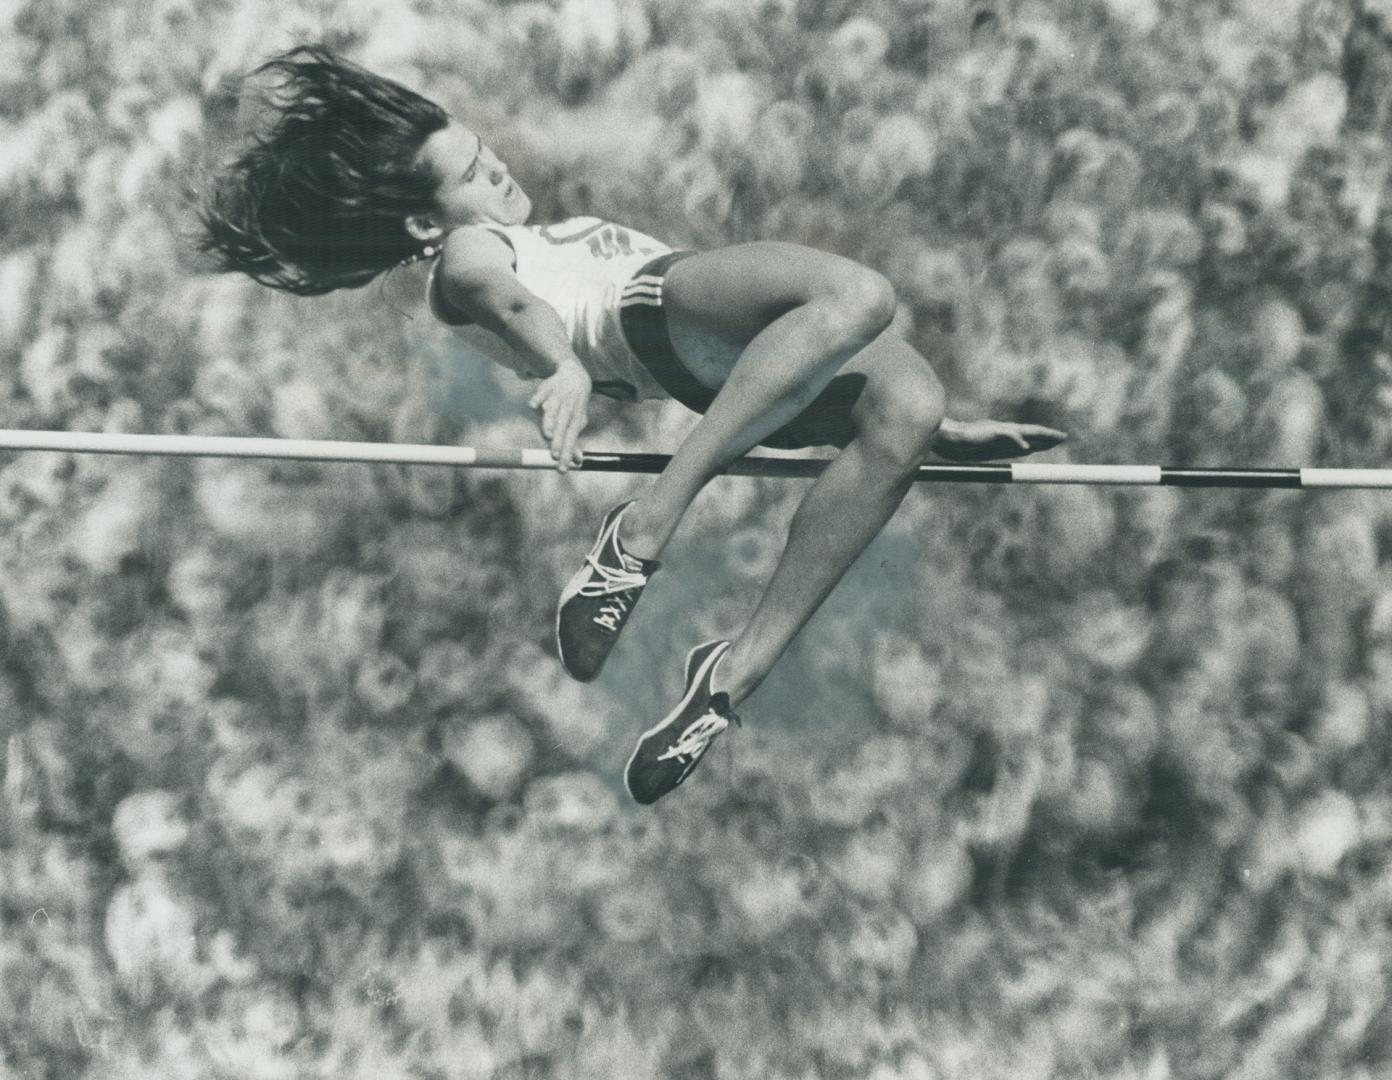 Debbie brill emerged from hippie commune in British Columbia to pick up what once was one of Canada's most promising track and field careers. She got (...)